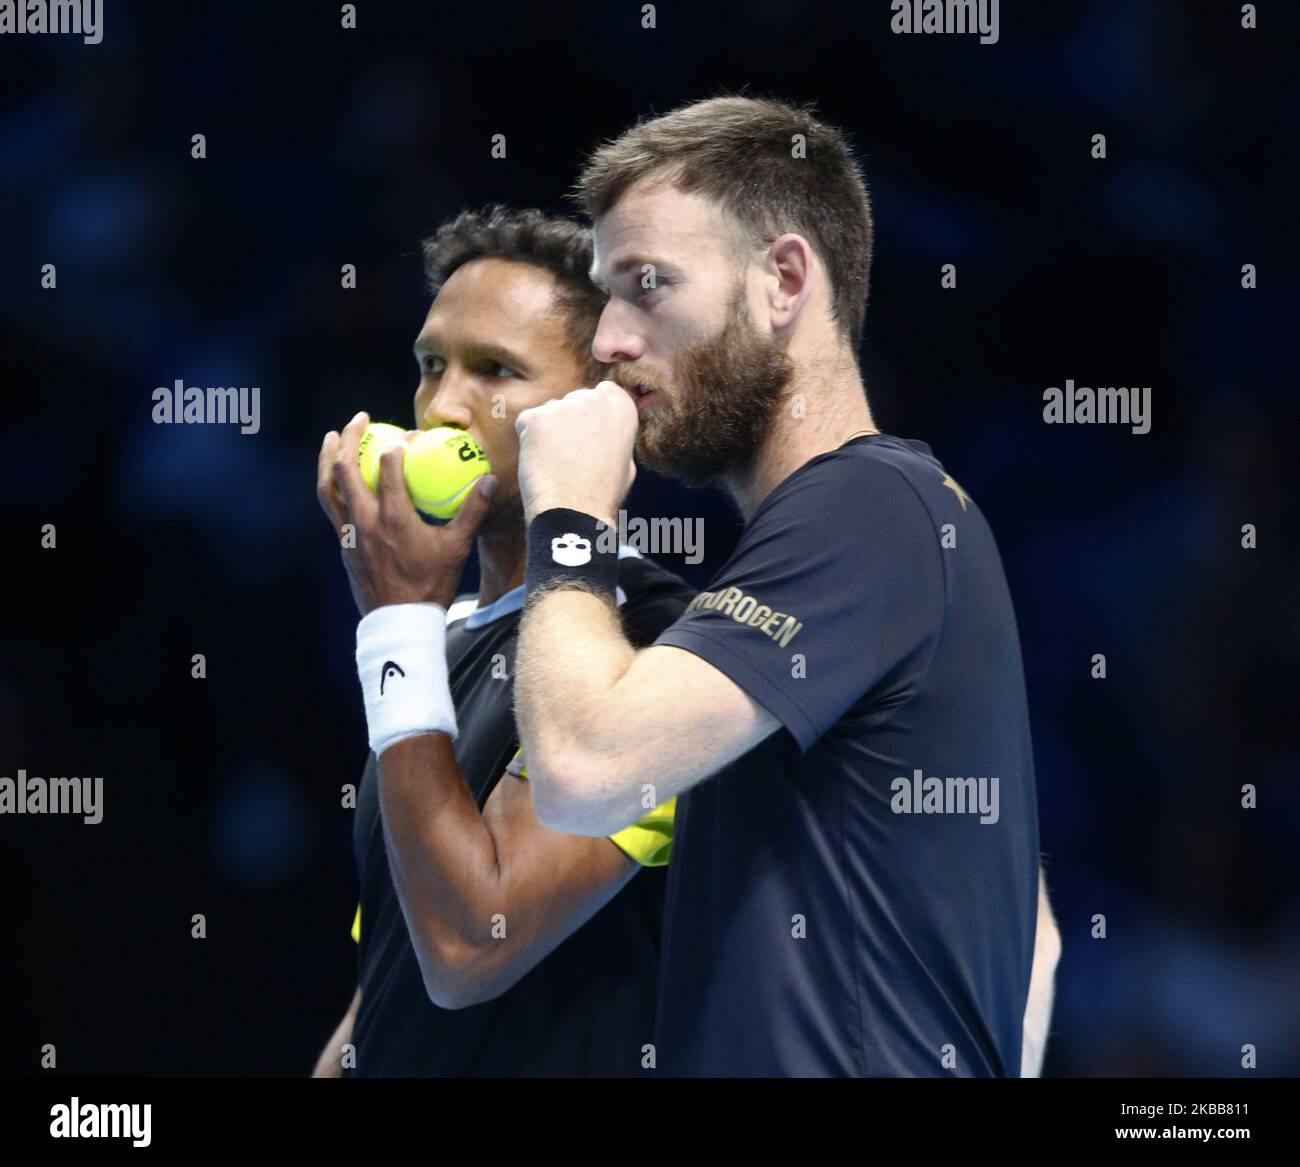 L-R Raven Klaasen (RSA) and Michael Venus (NZL) during Doubles Championship Semi-Final match Raven Klaasen (RSA) and Michael Venus (NZL) against Juan Sebastian Cabal and Robert Farah (COL) International Tennis - Nitto ATP World Tour Finals Day 7 - Tuesday 16th November 2019 - O2 Arena - London (Photo by Action Foto Sport/NurPhoto) Stock Photo